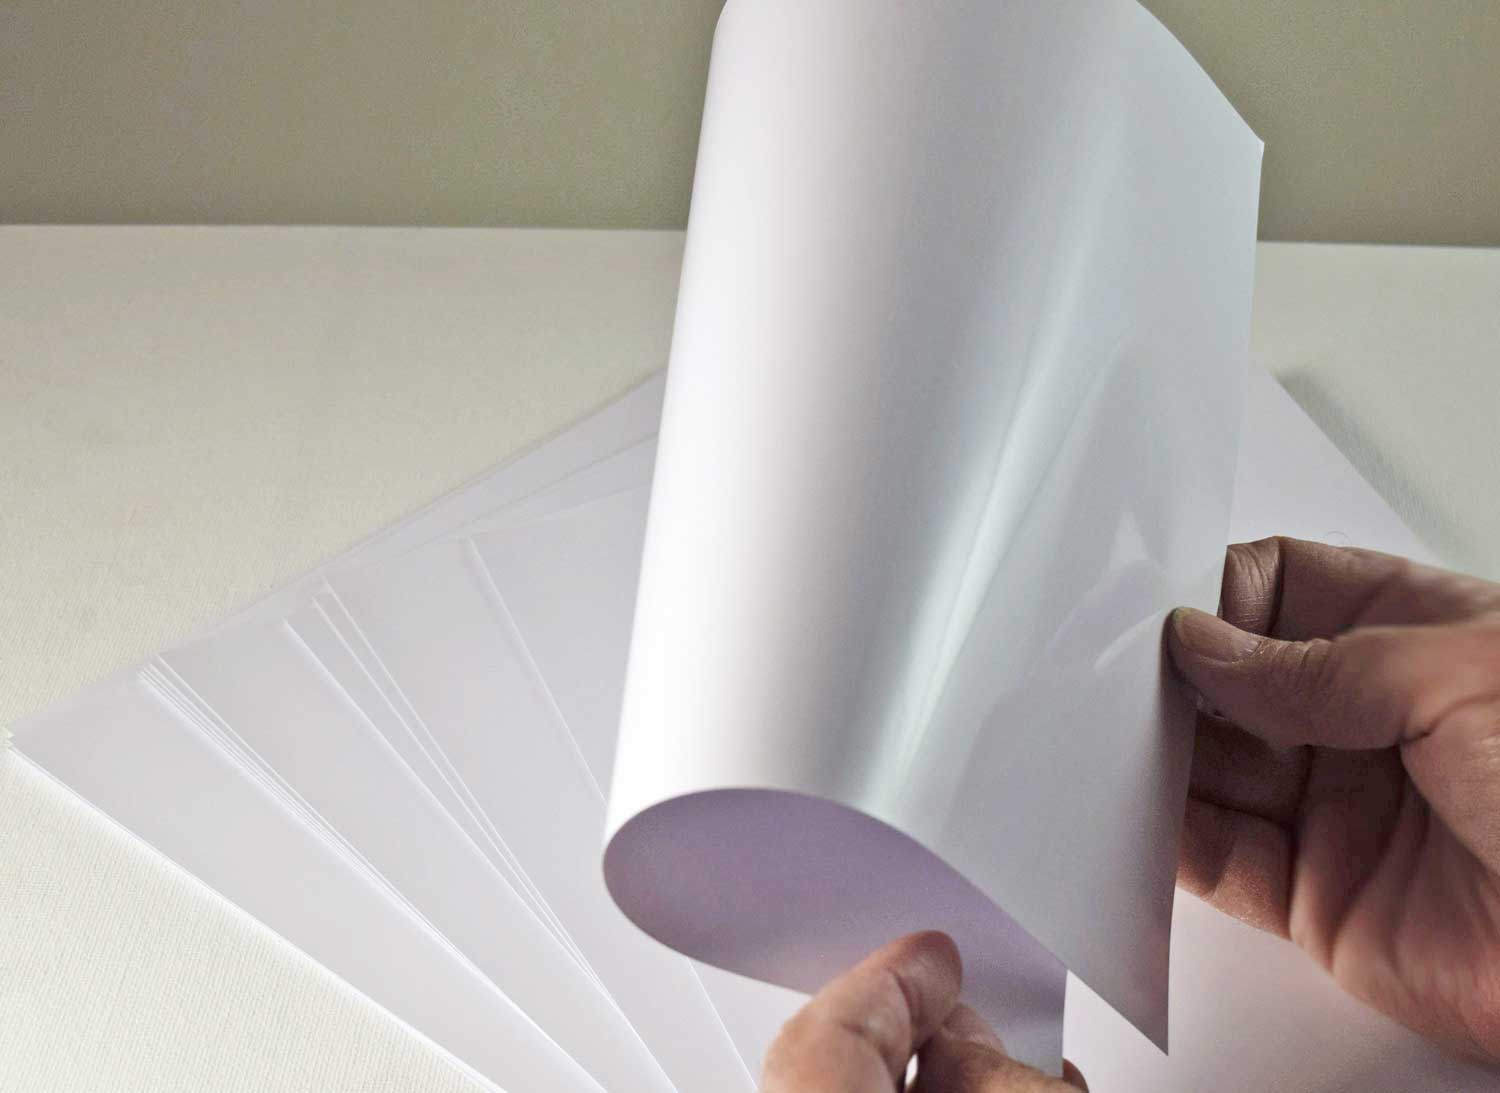 What is laser paper?